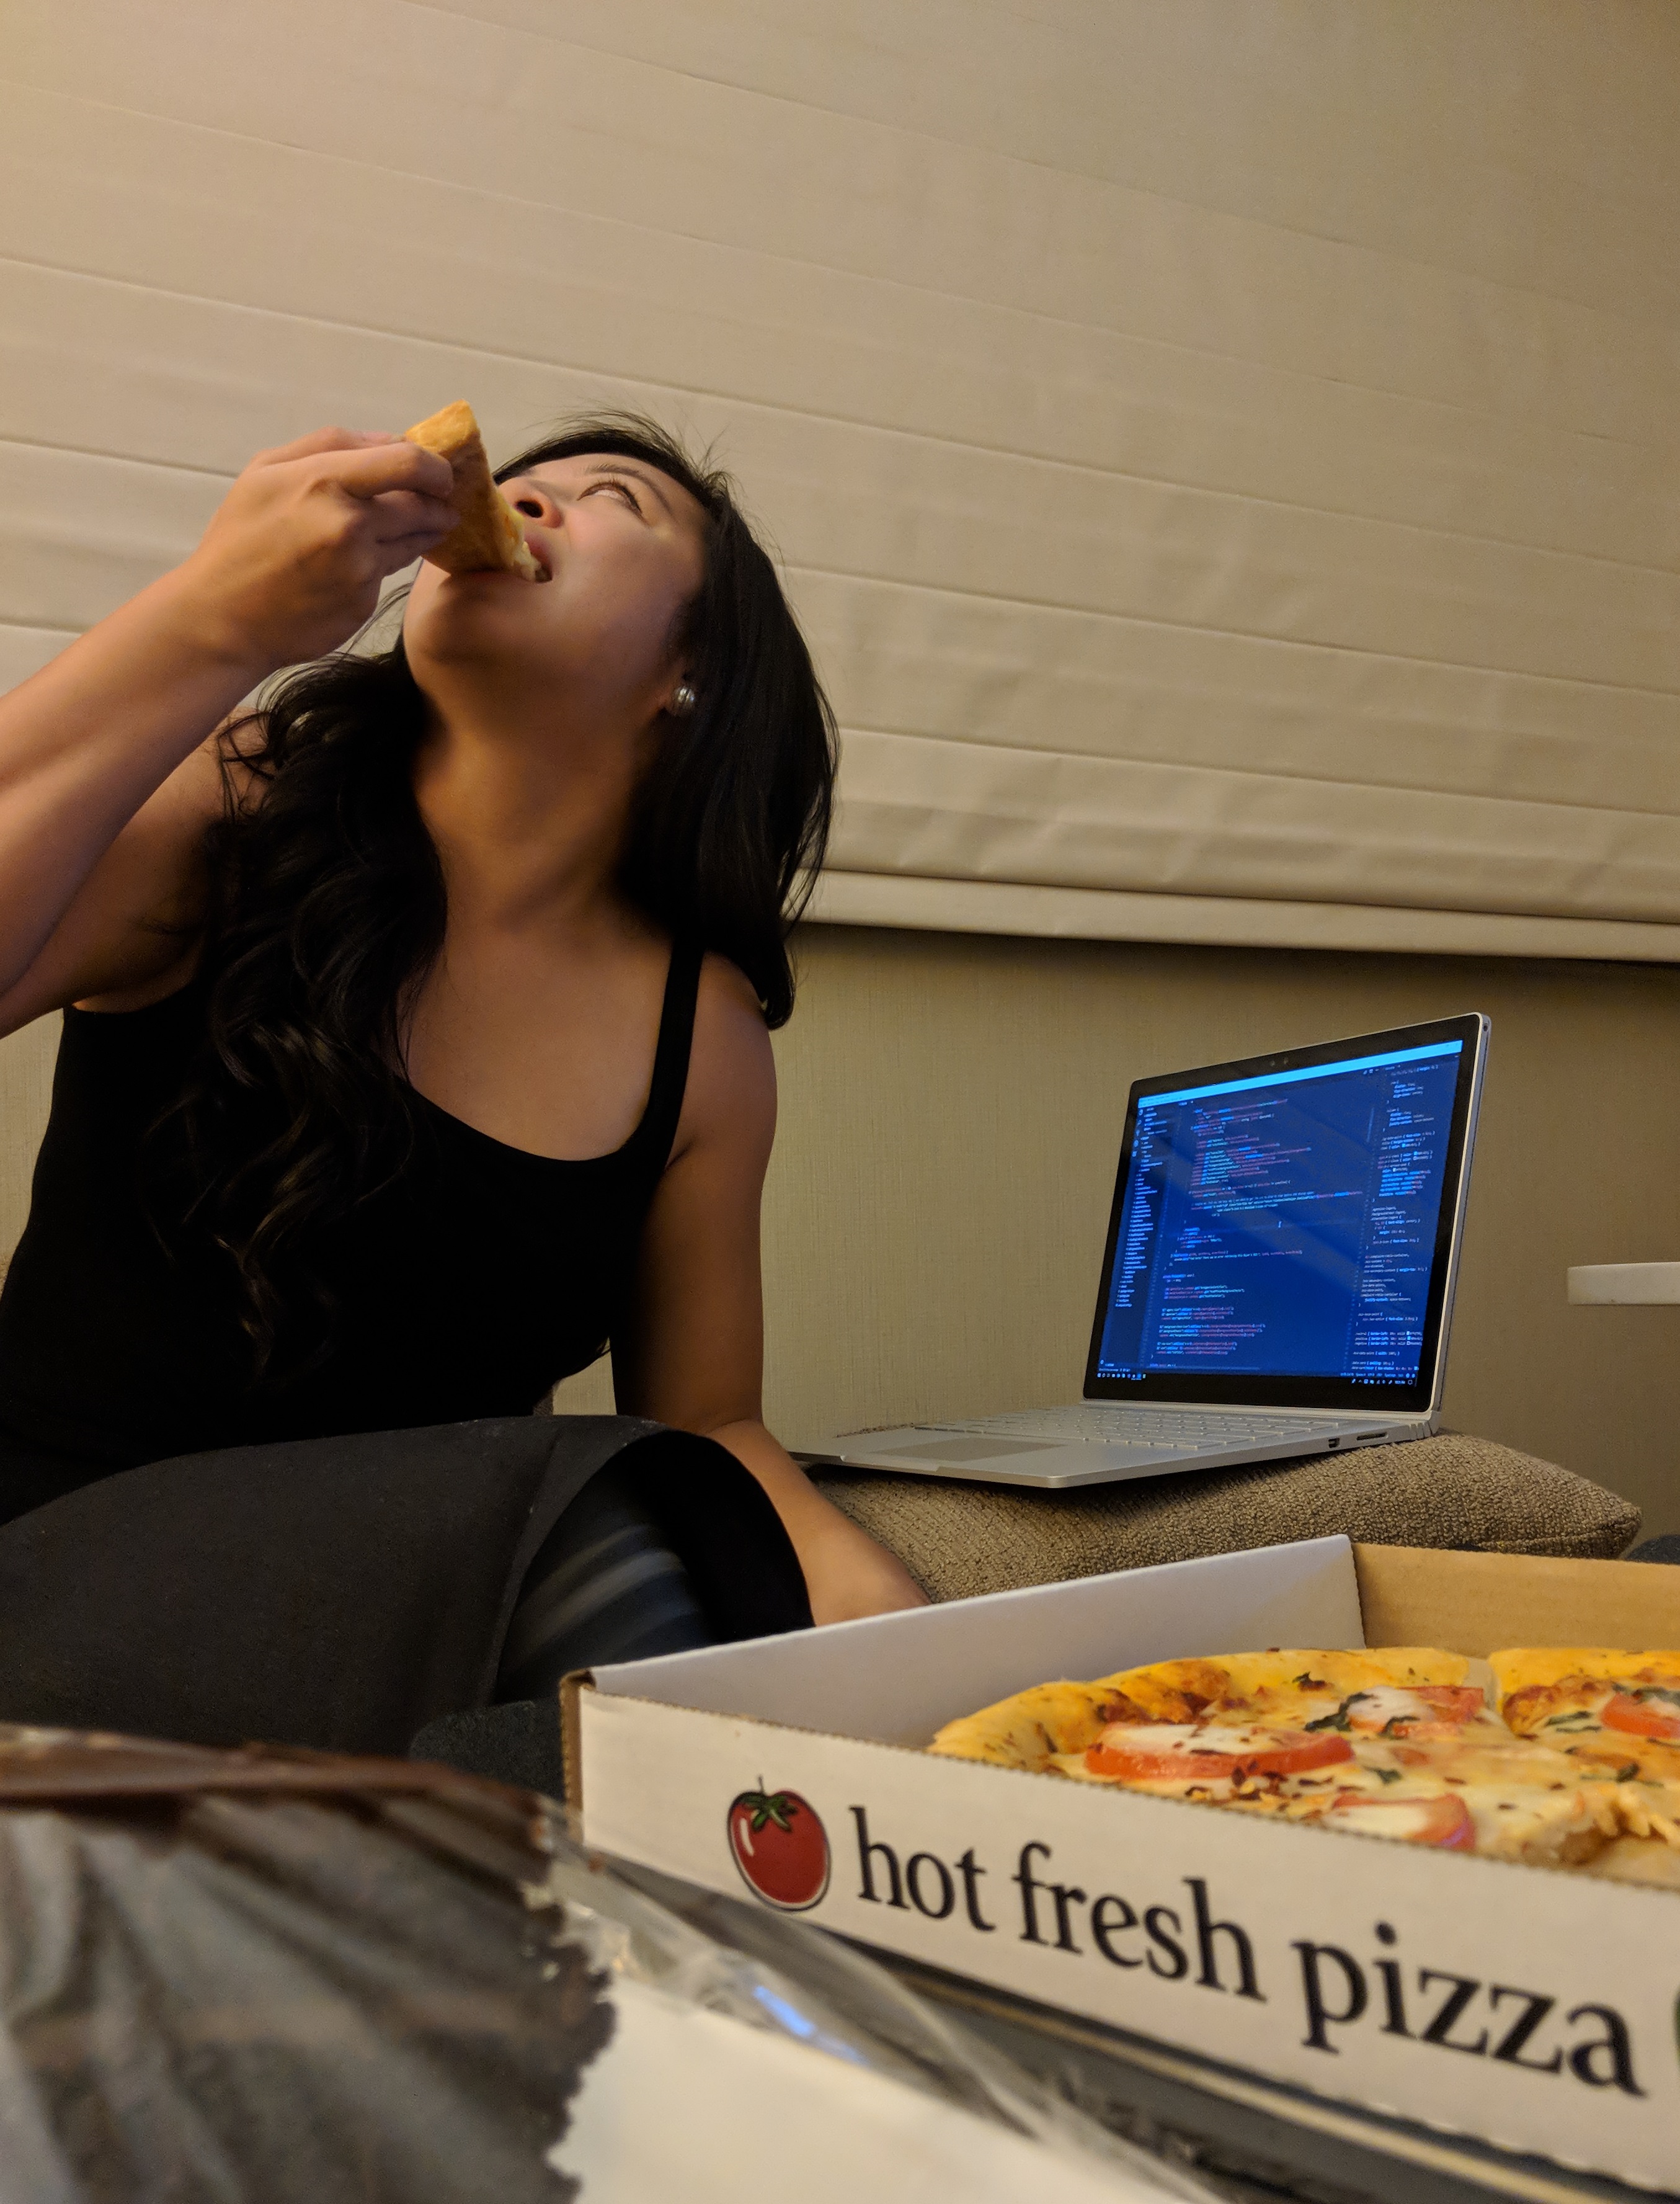 Adrienne eating a pizza in her hotel room.